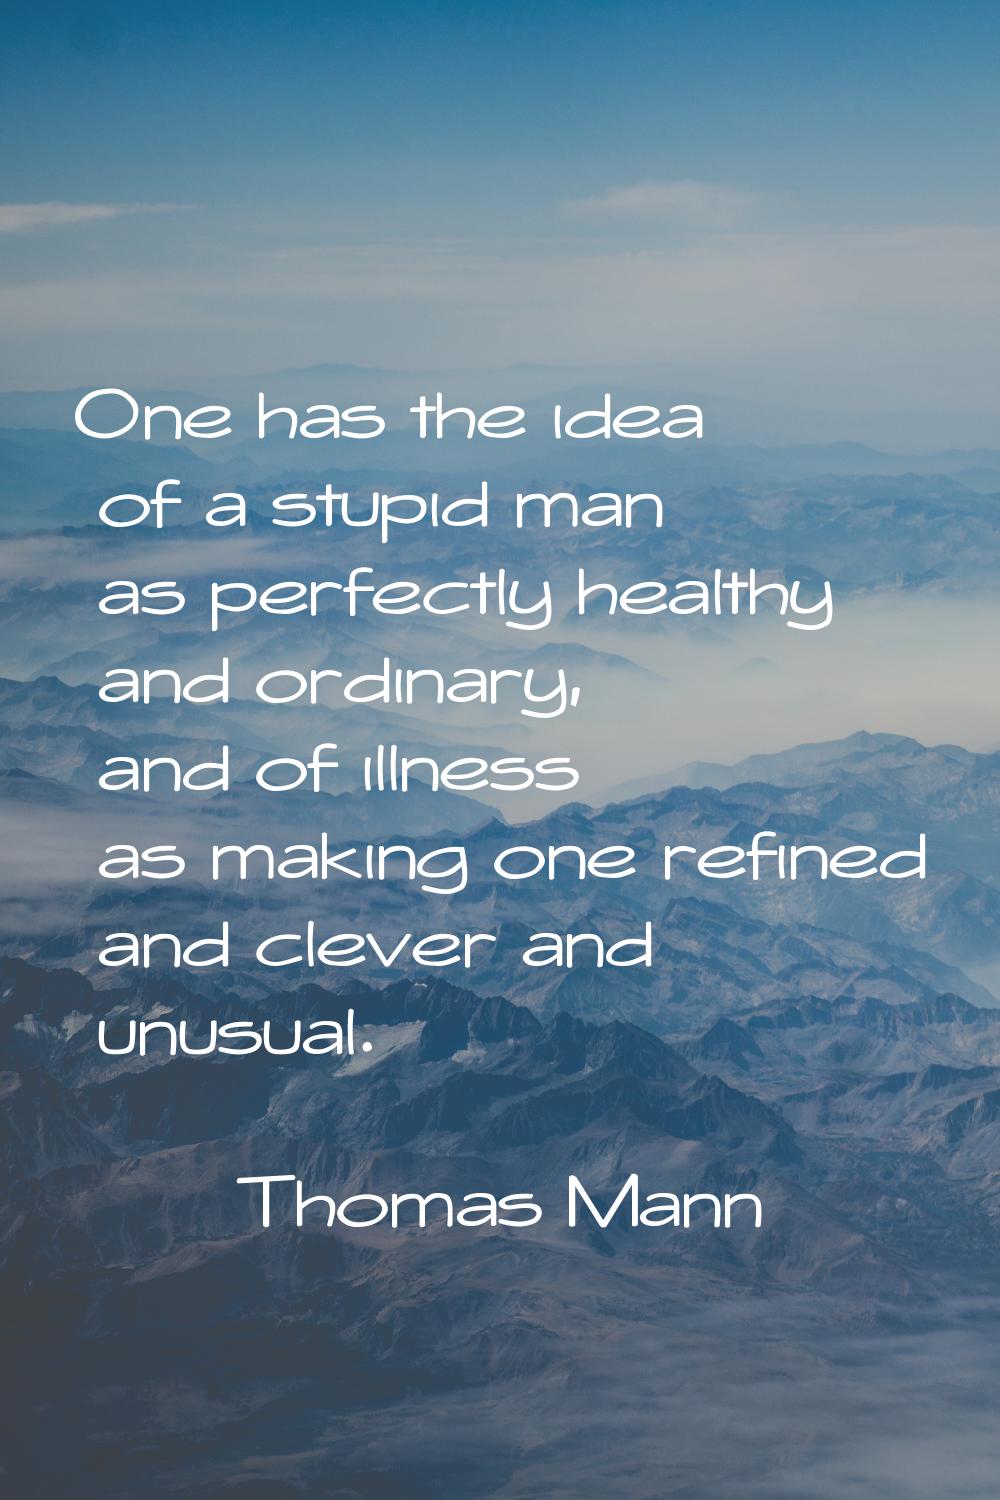 One has the idea of a stupid man as perfectly healthy and ordinary, and of illness as making one re